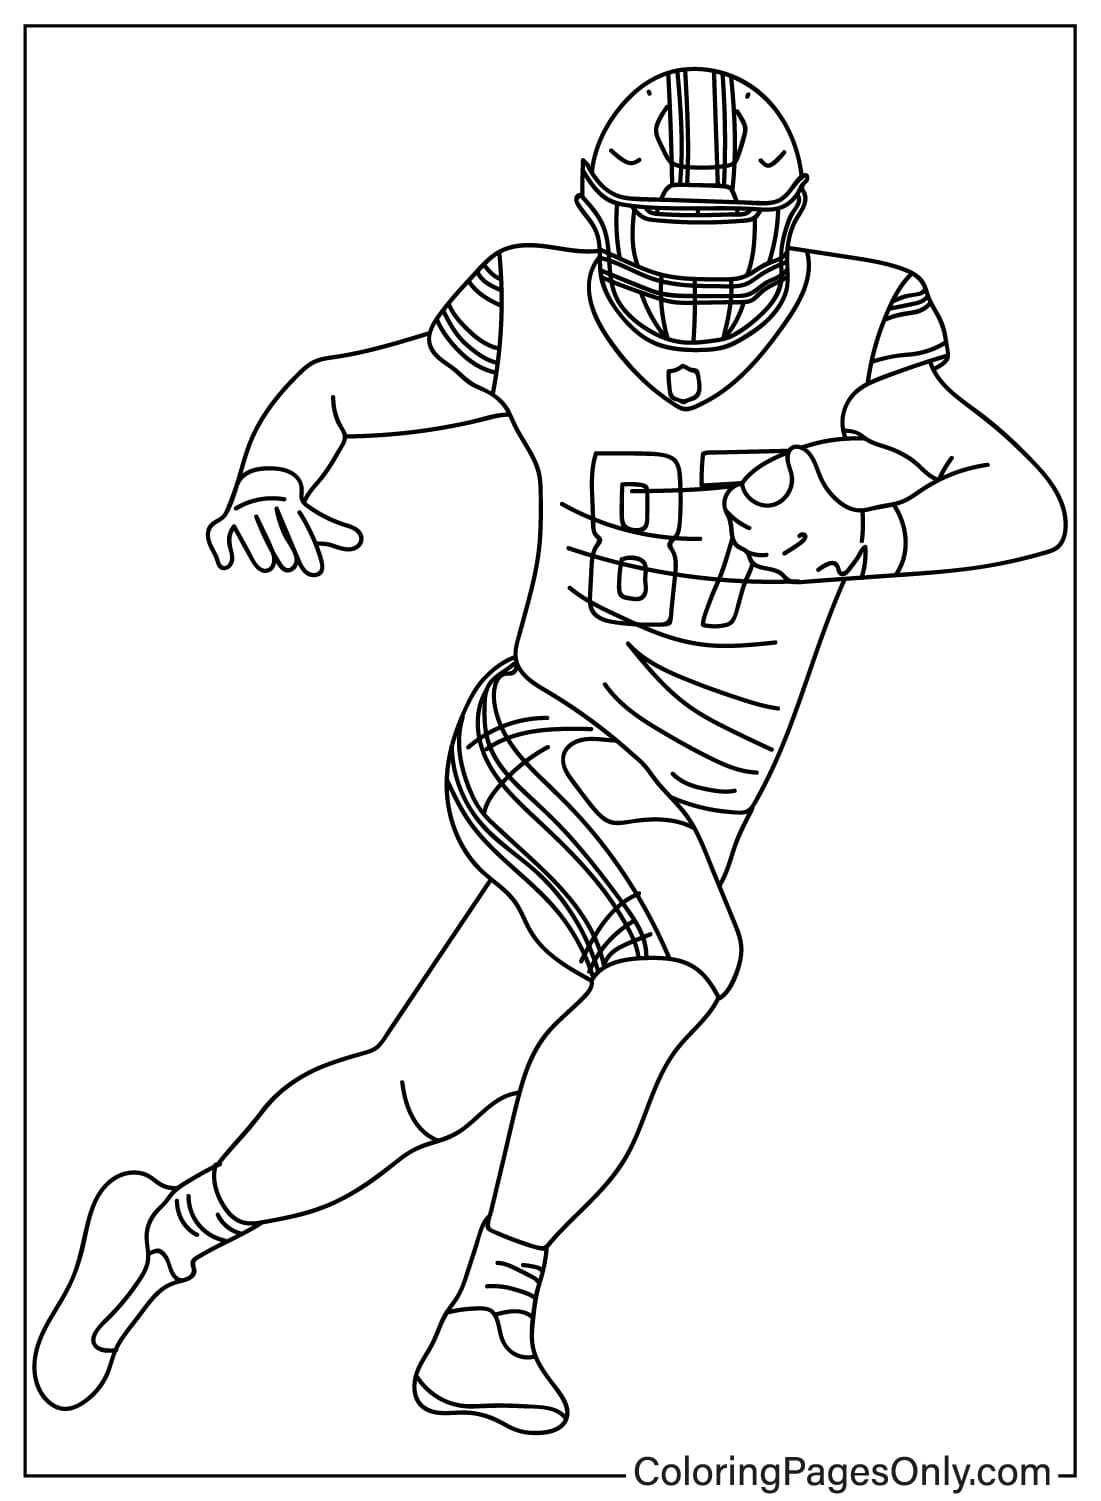 Sam LaPorta Coloring Page from Detroit Lions